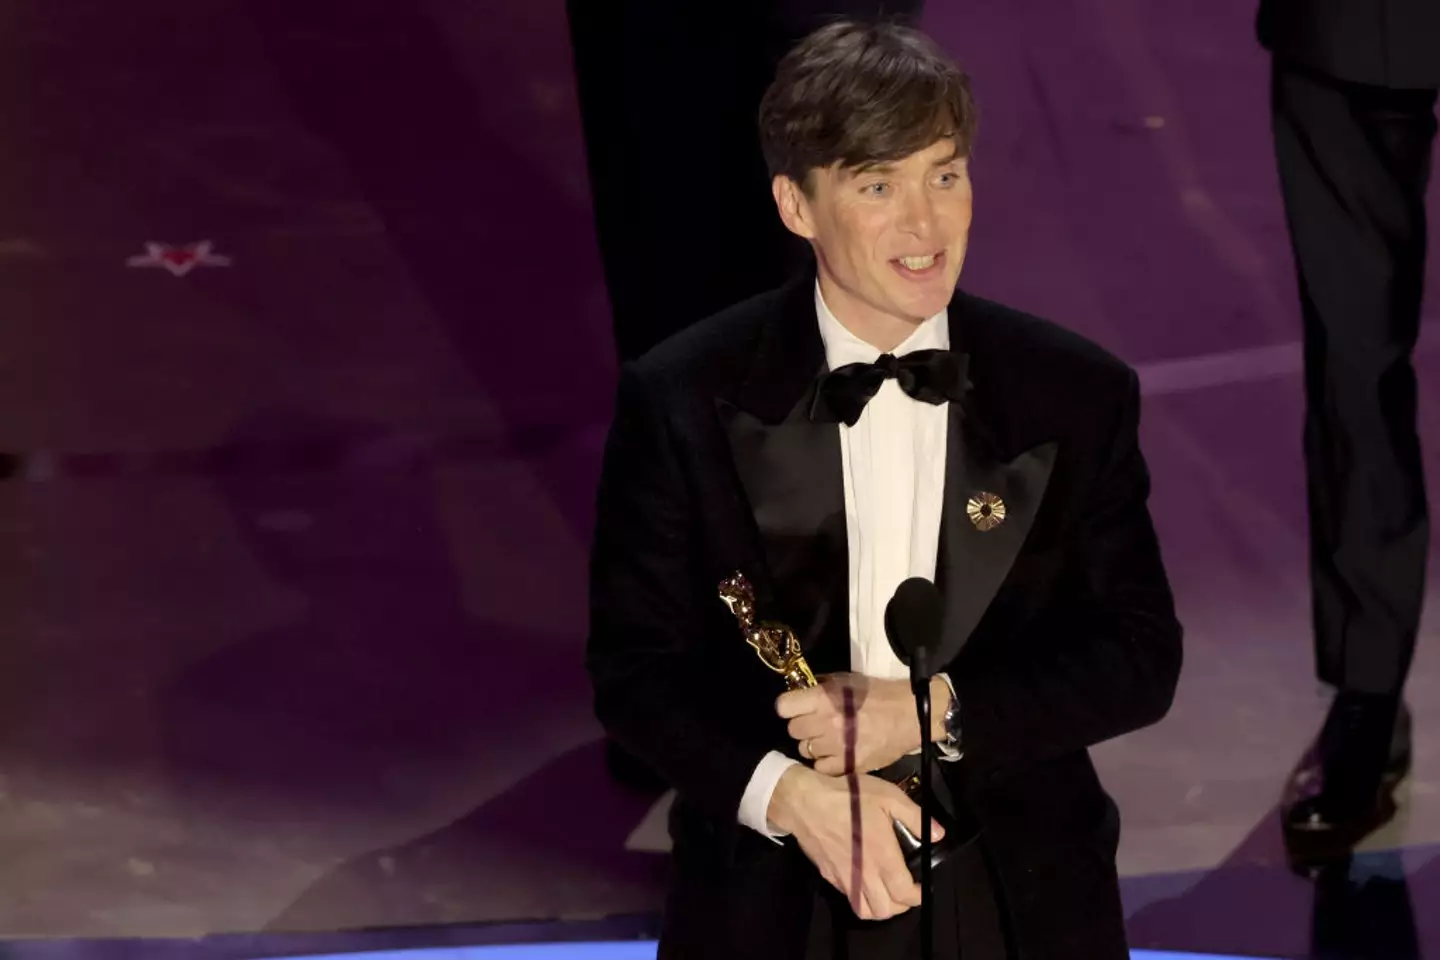 Cillian Murphy was praised for his message in Irish during his acceptance speech.